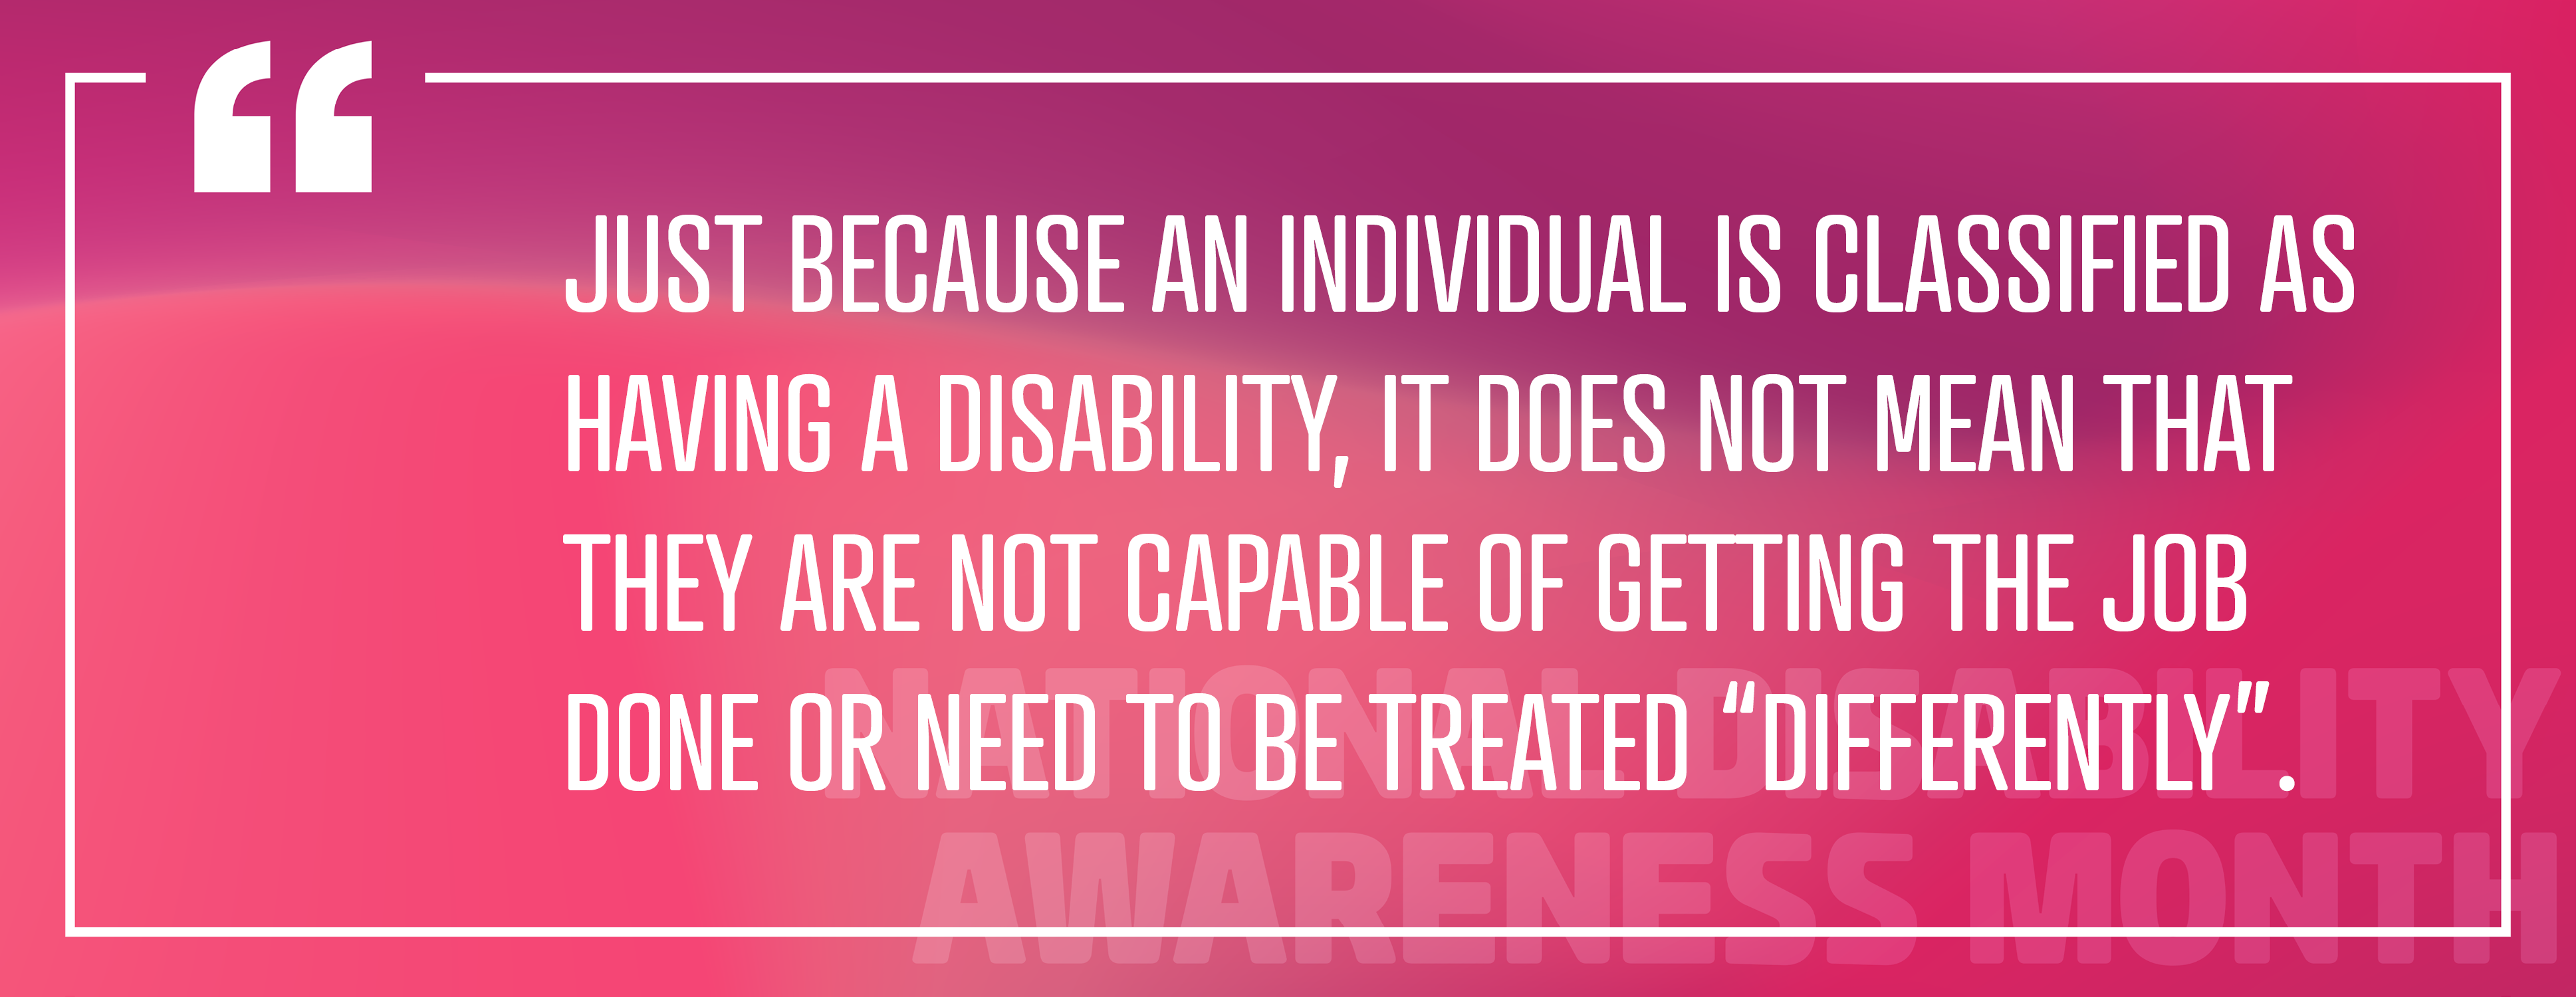 Image 4: "Just because an individual is classified as having a disability, it does not mean that they are not capable of getting the job done or need to be treated "differently"."